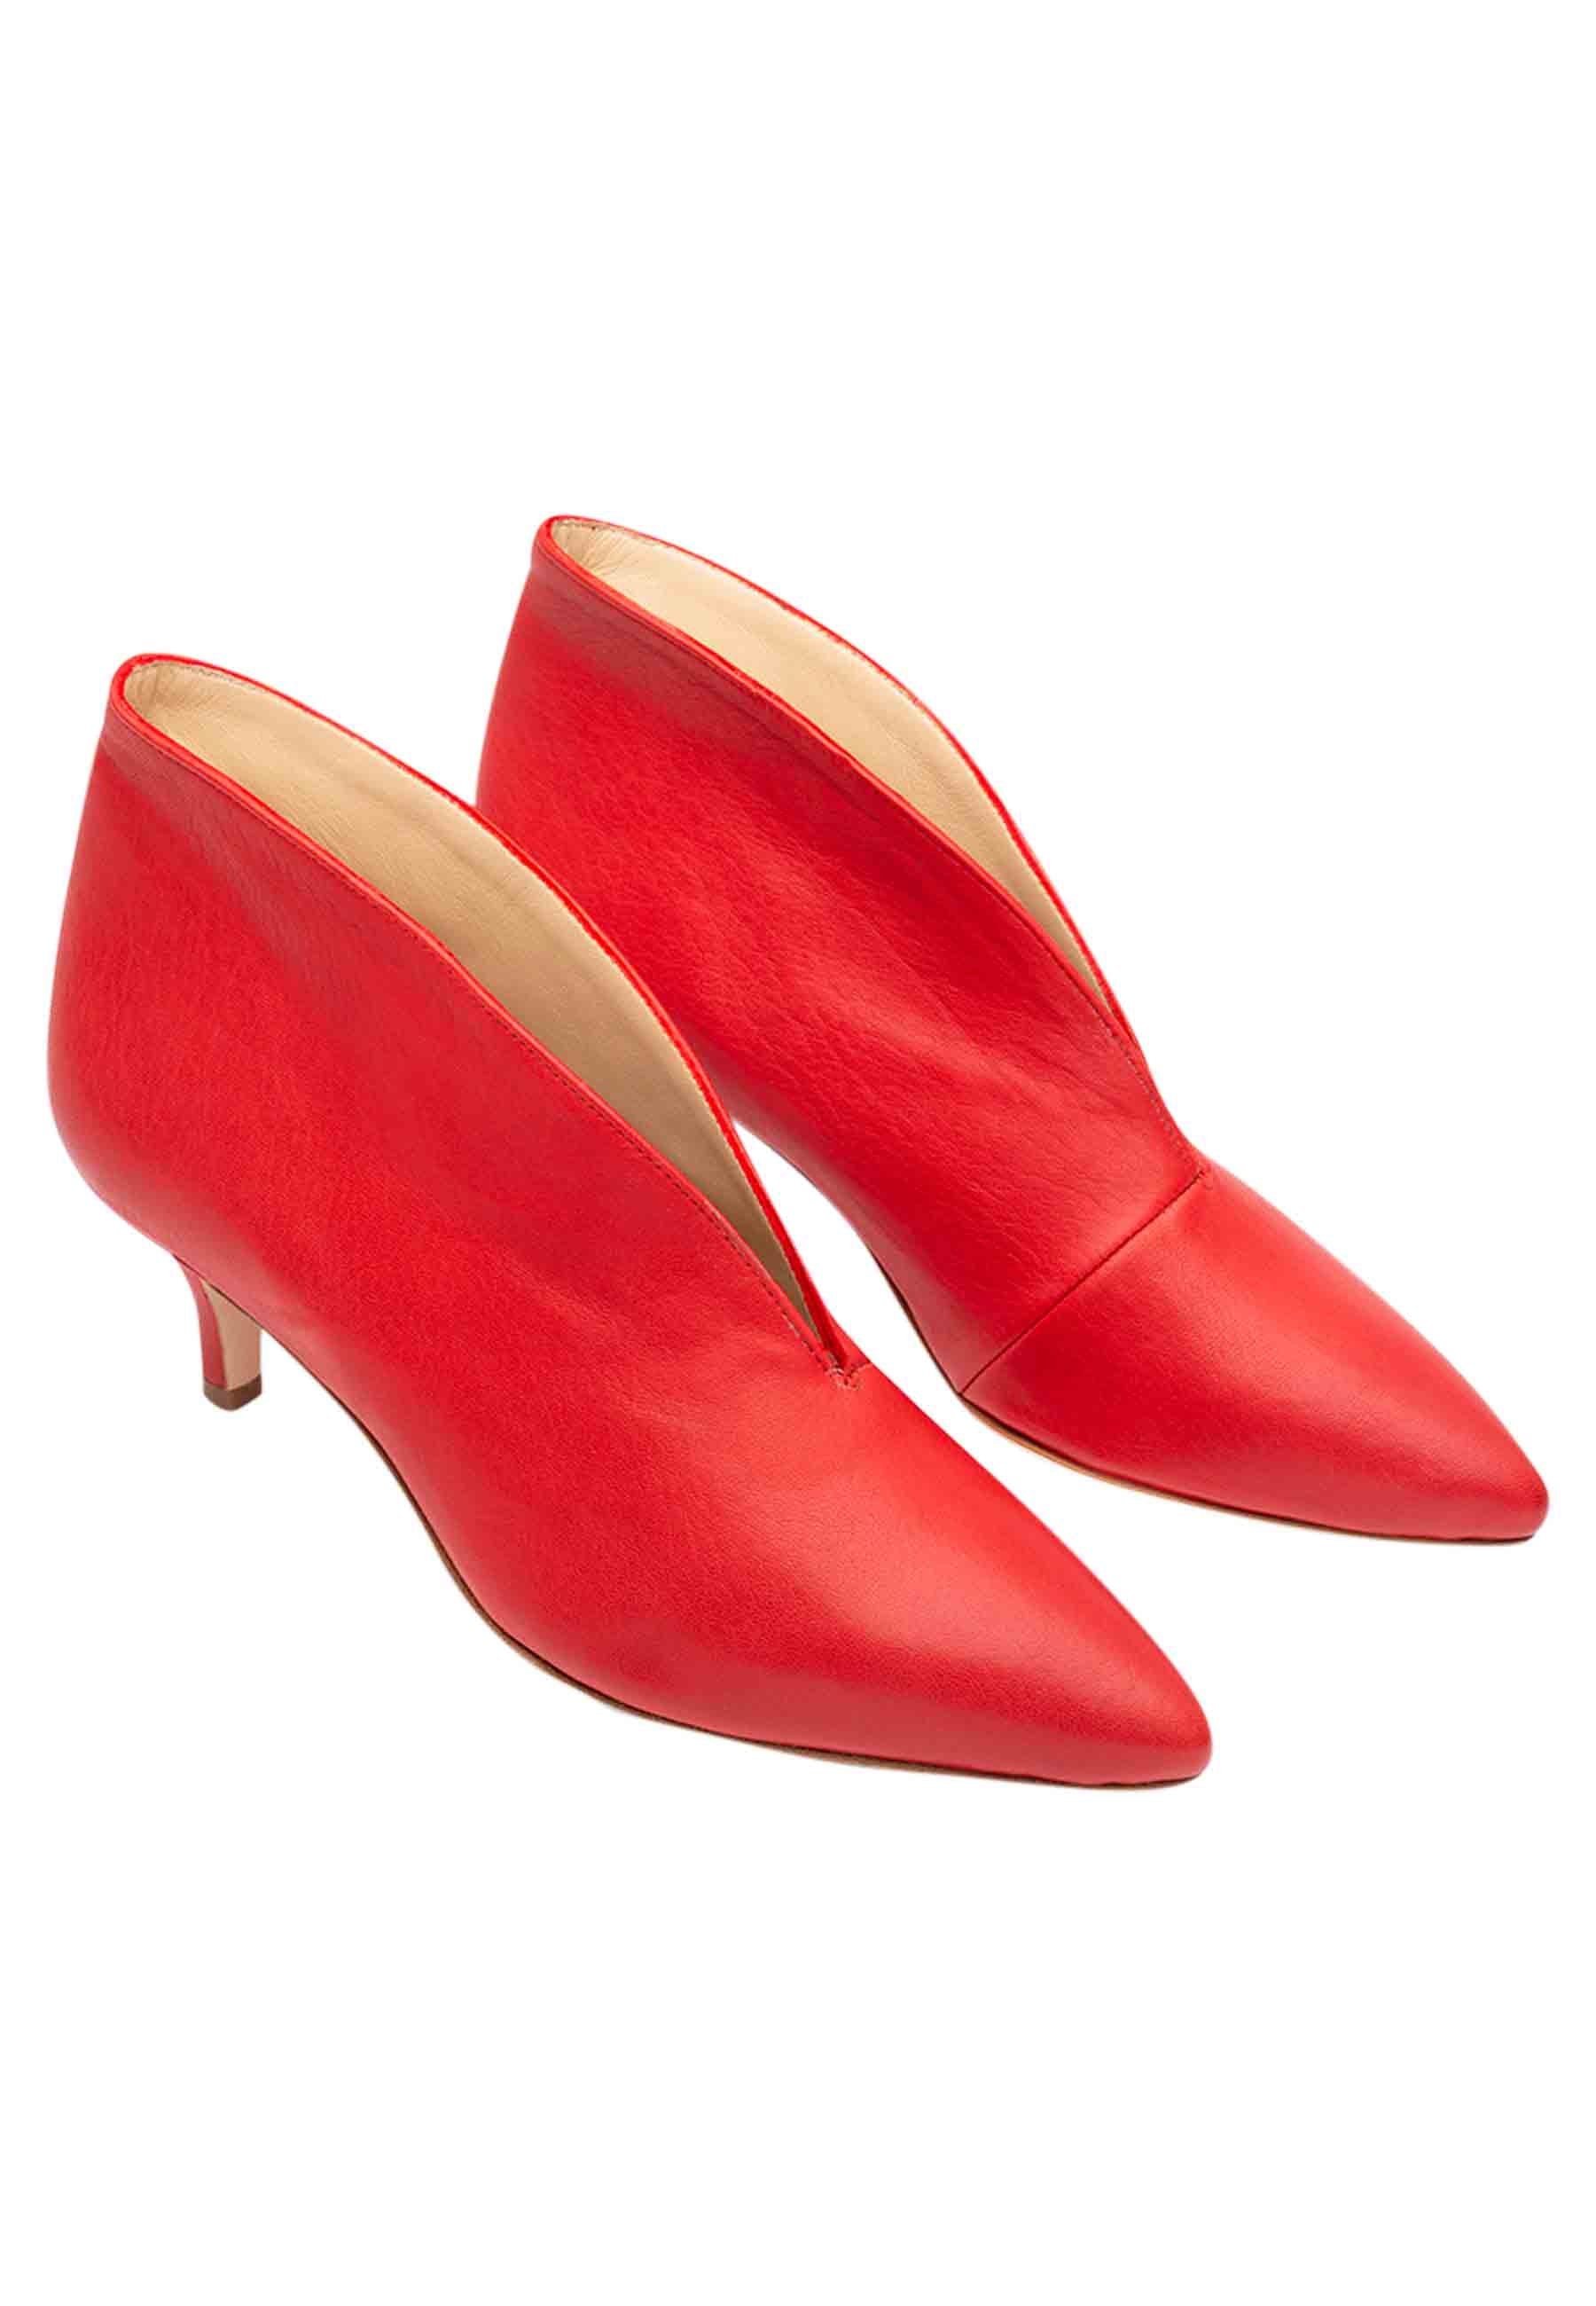 Women's red leather ankle boots with low heel